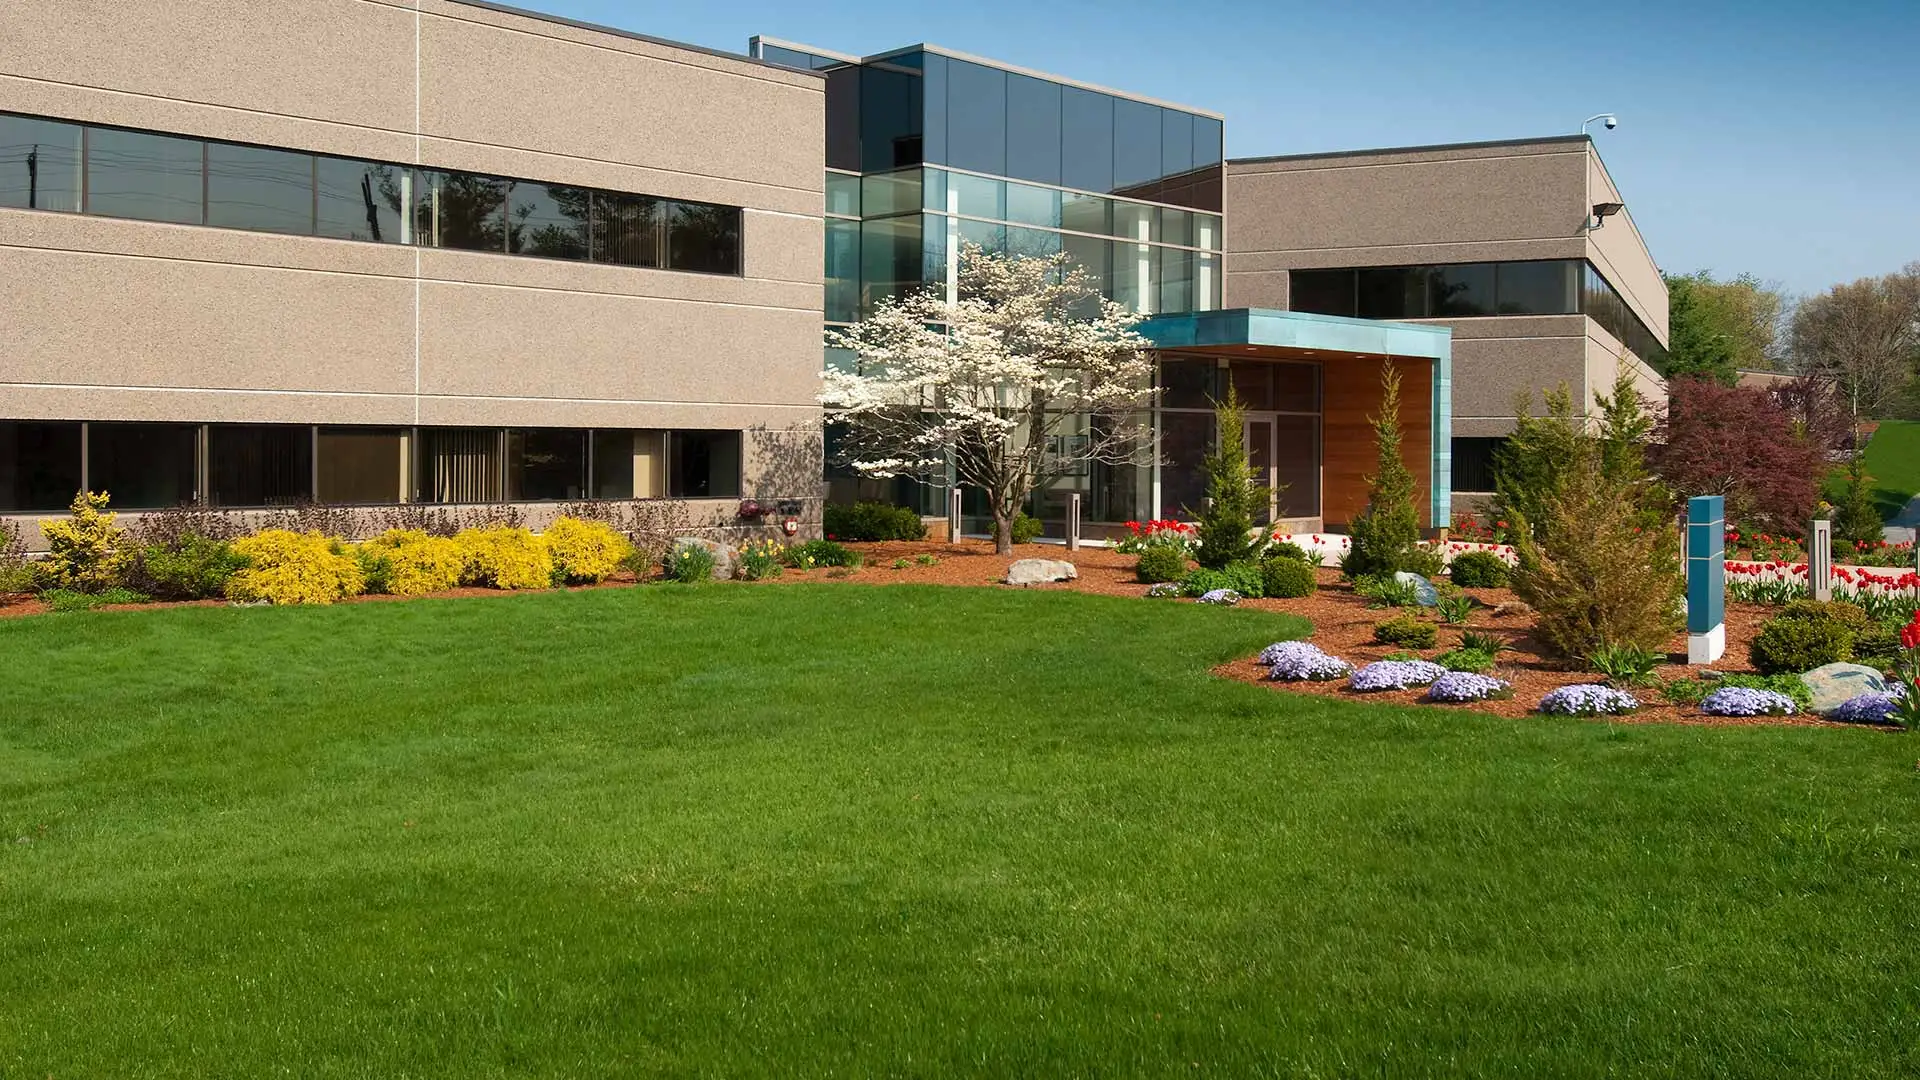 Commercial property with regular lawn mowing and maintenance services in St. Cloud, MN.